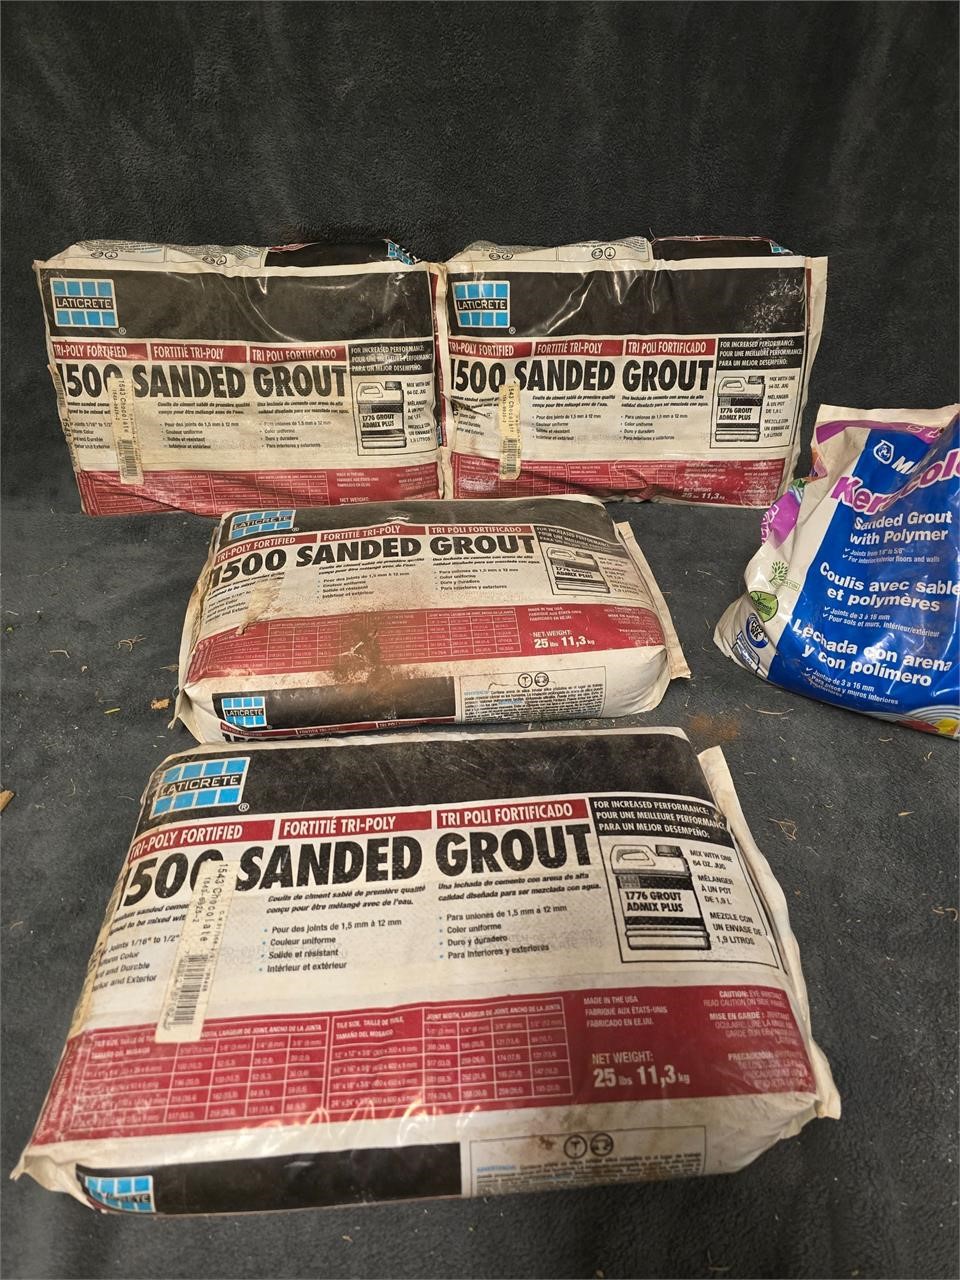 Tri-poly fortified 1500 sanded grout lot of 4